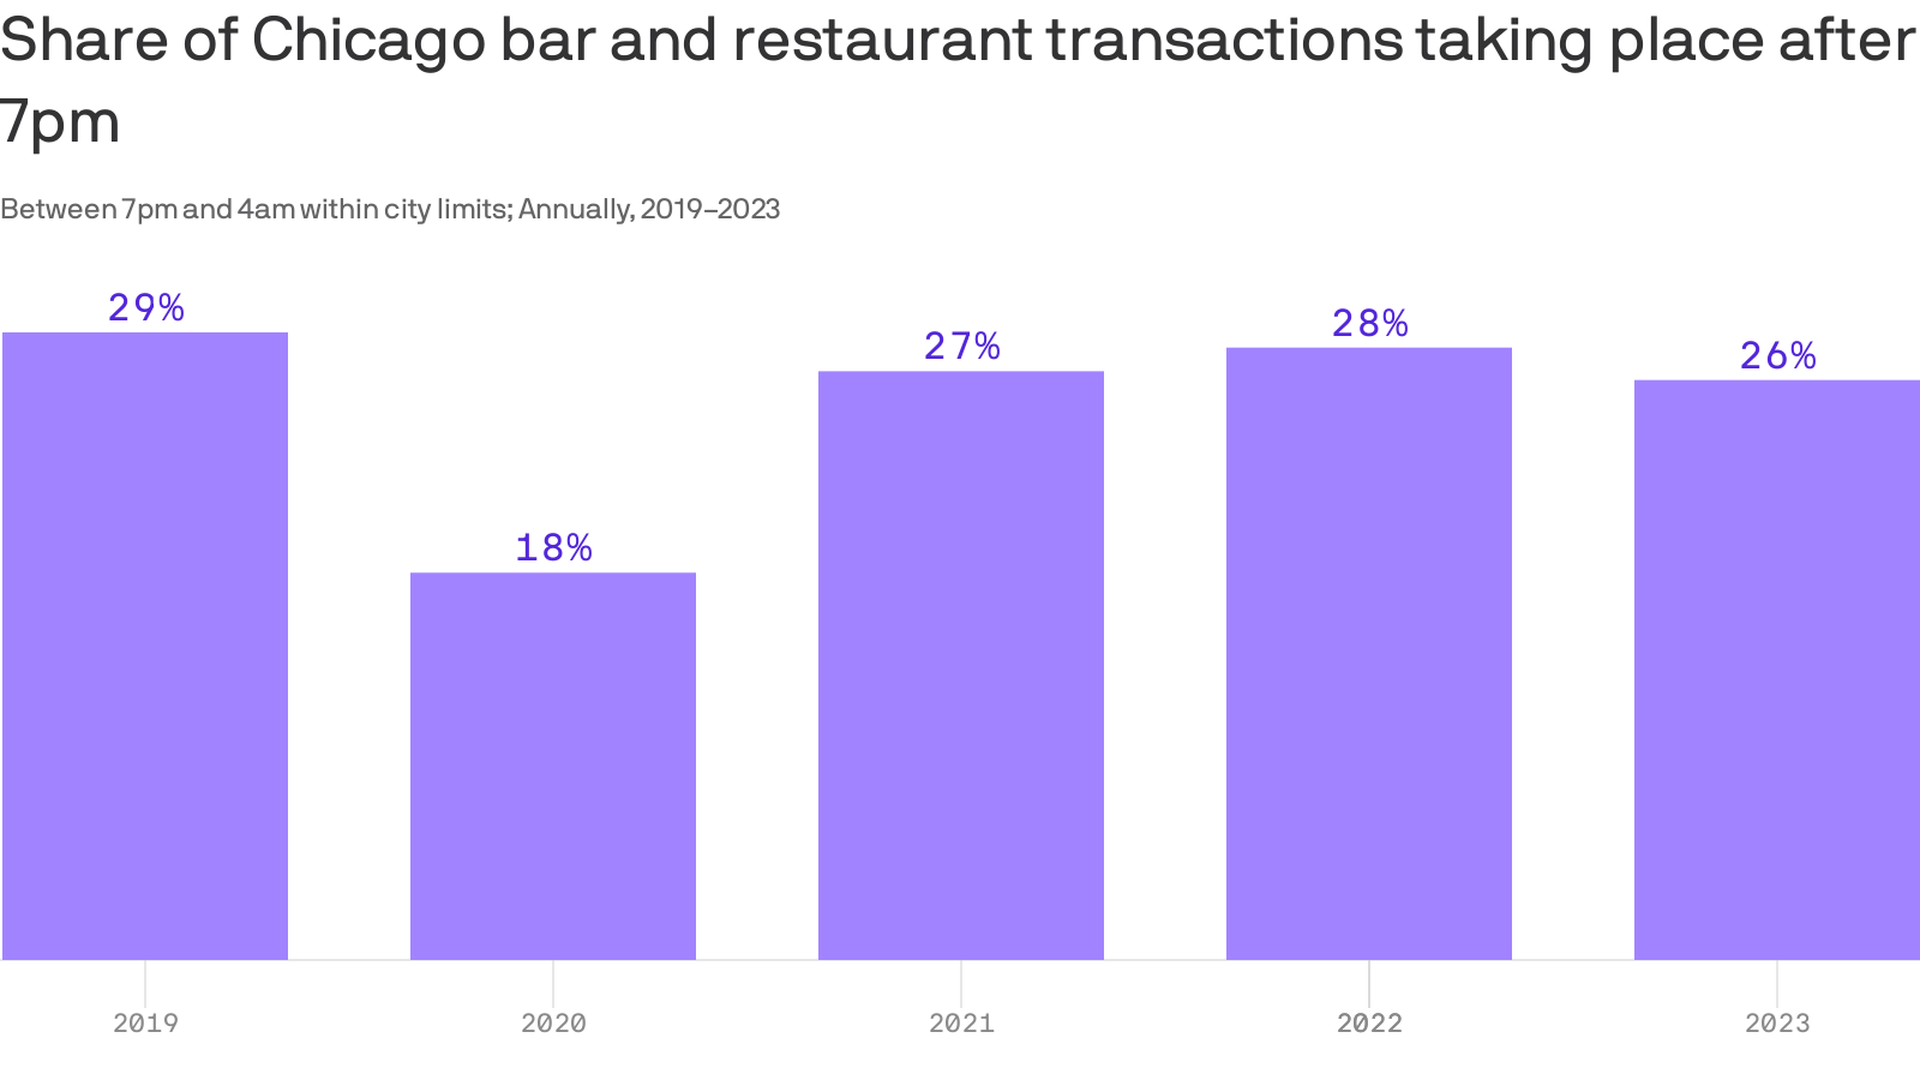 A data visualization showing that the share of Chicago bar and restaurant transactions taking place after 7pm is 26% so far in 2023.